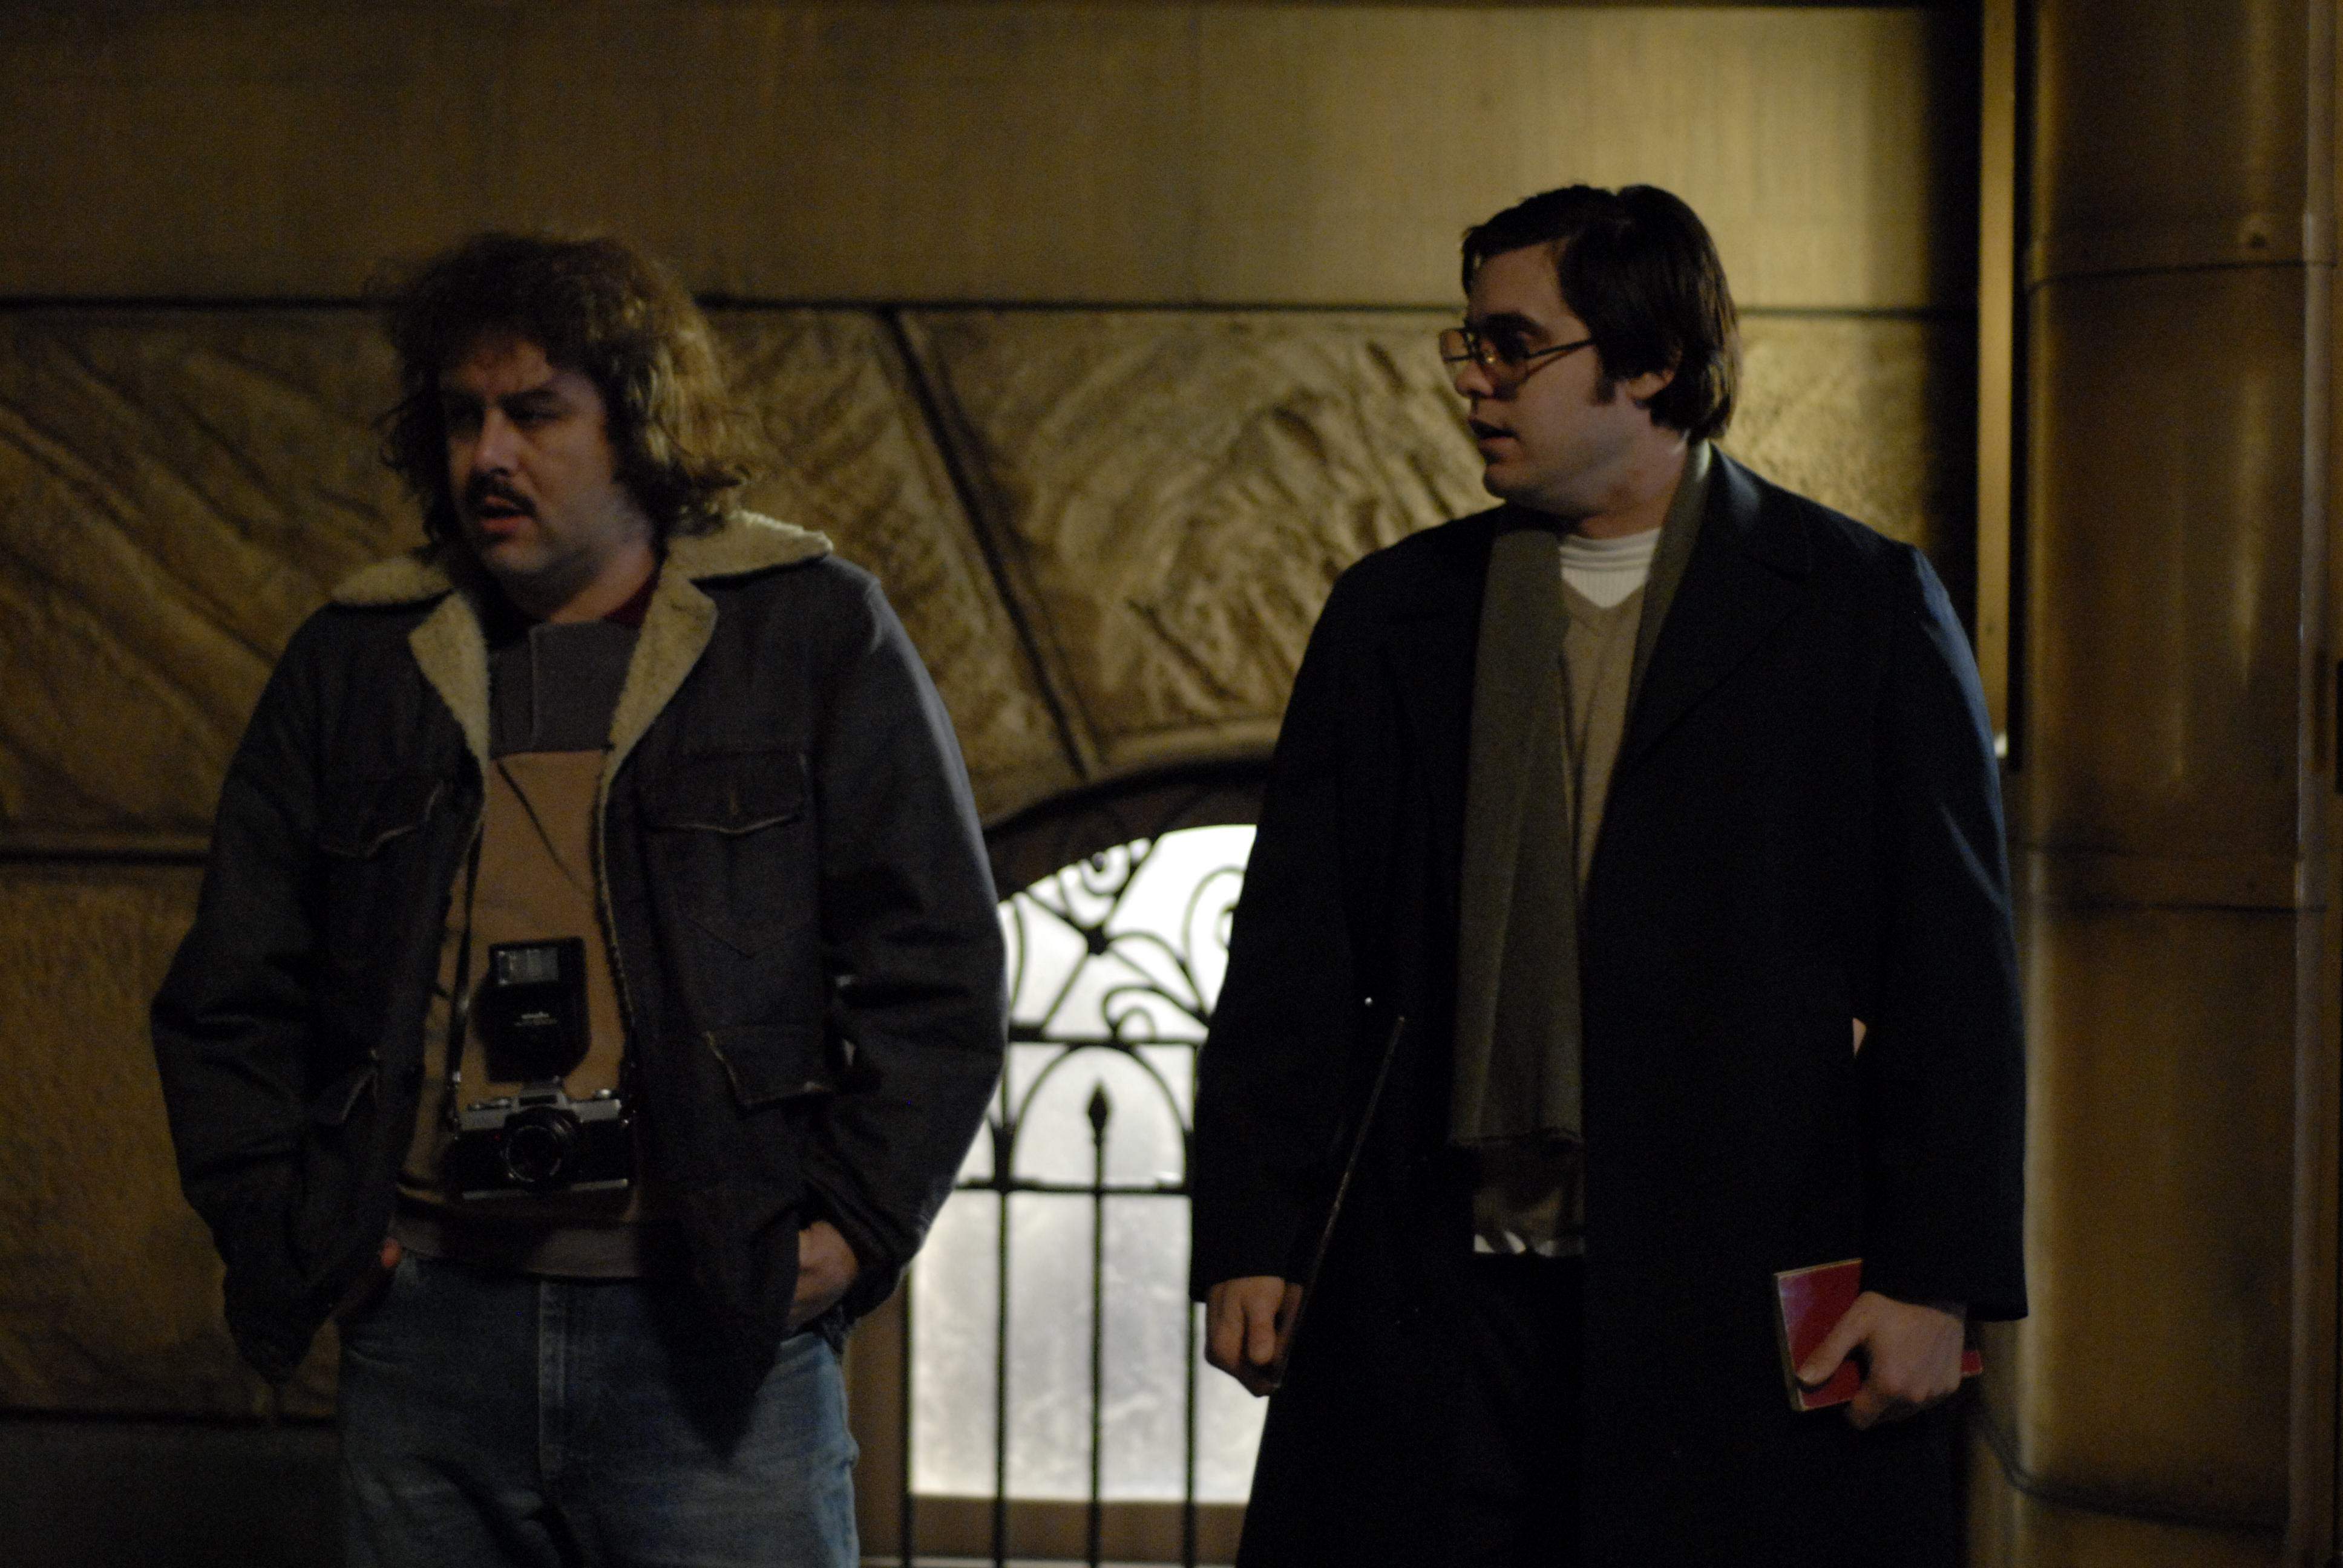 Judah Friedlander as Paul and Jared Leto as Mark David Chapman in Peace Arch Entertainment's Chapter 27 (2008)